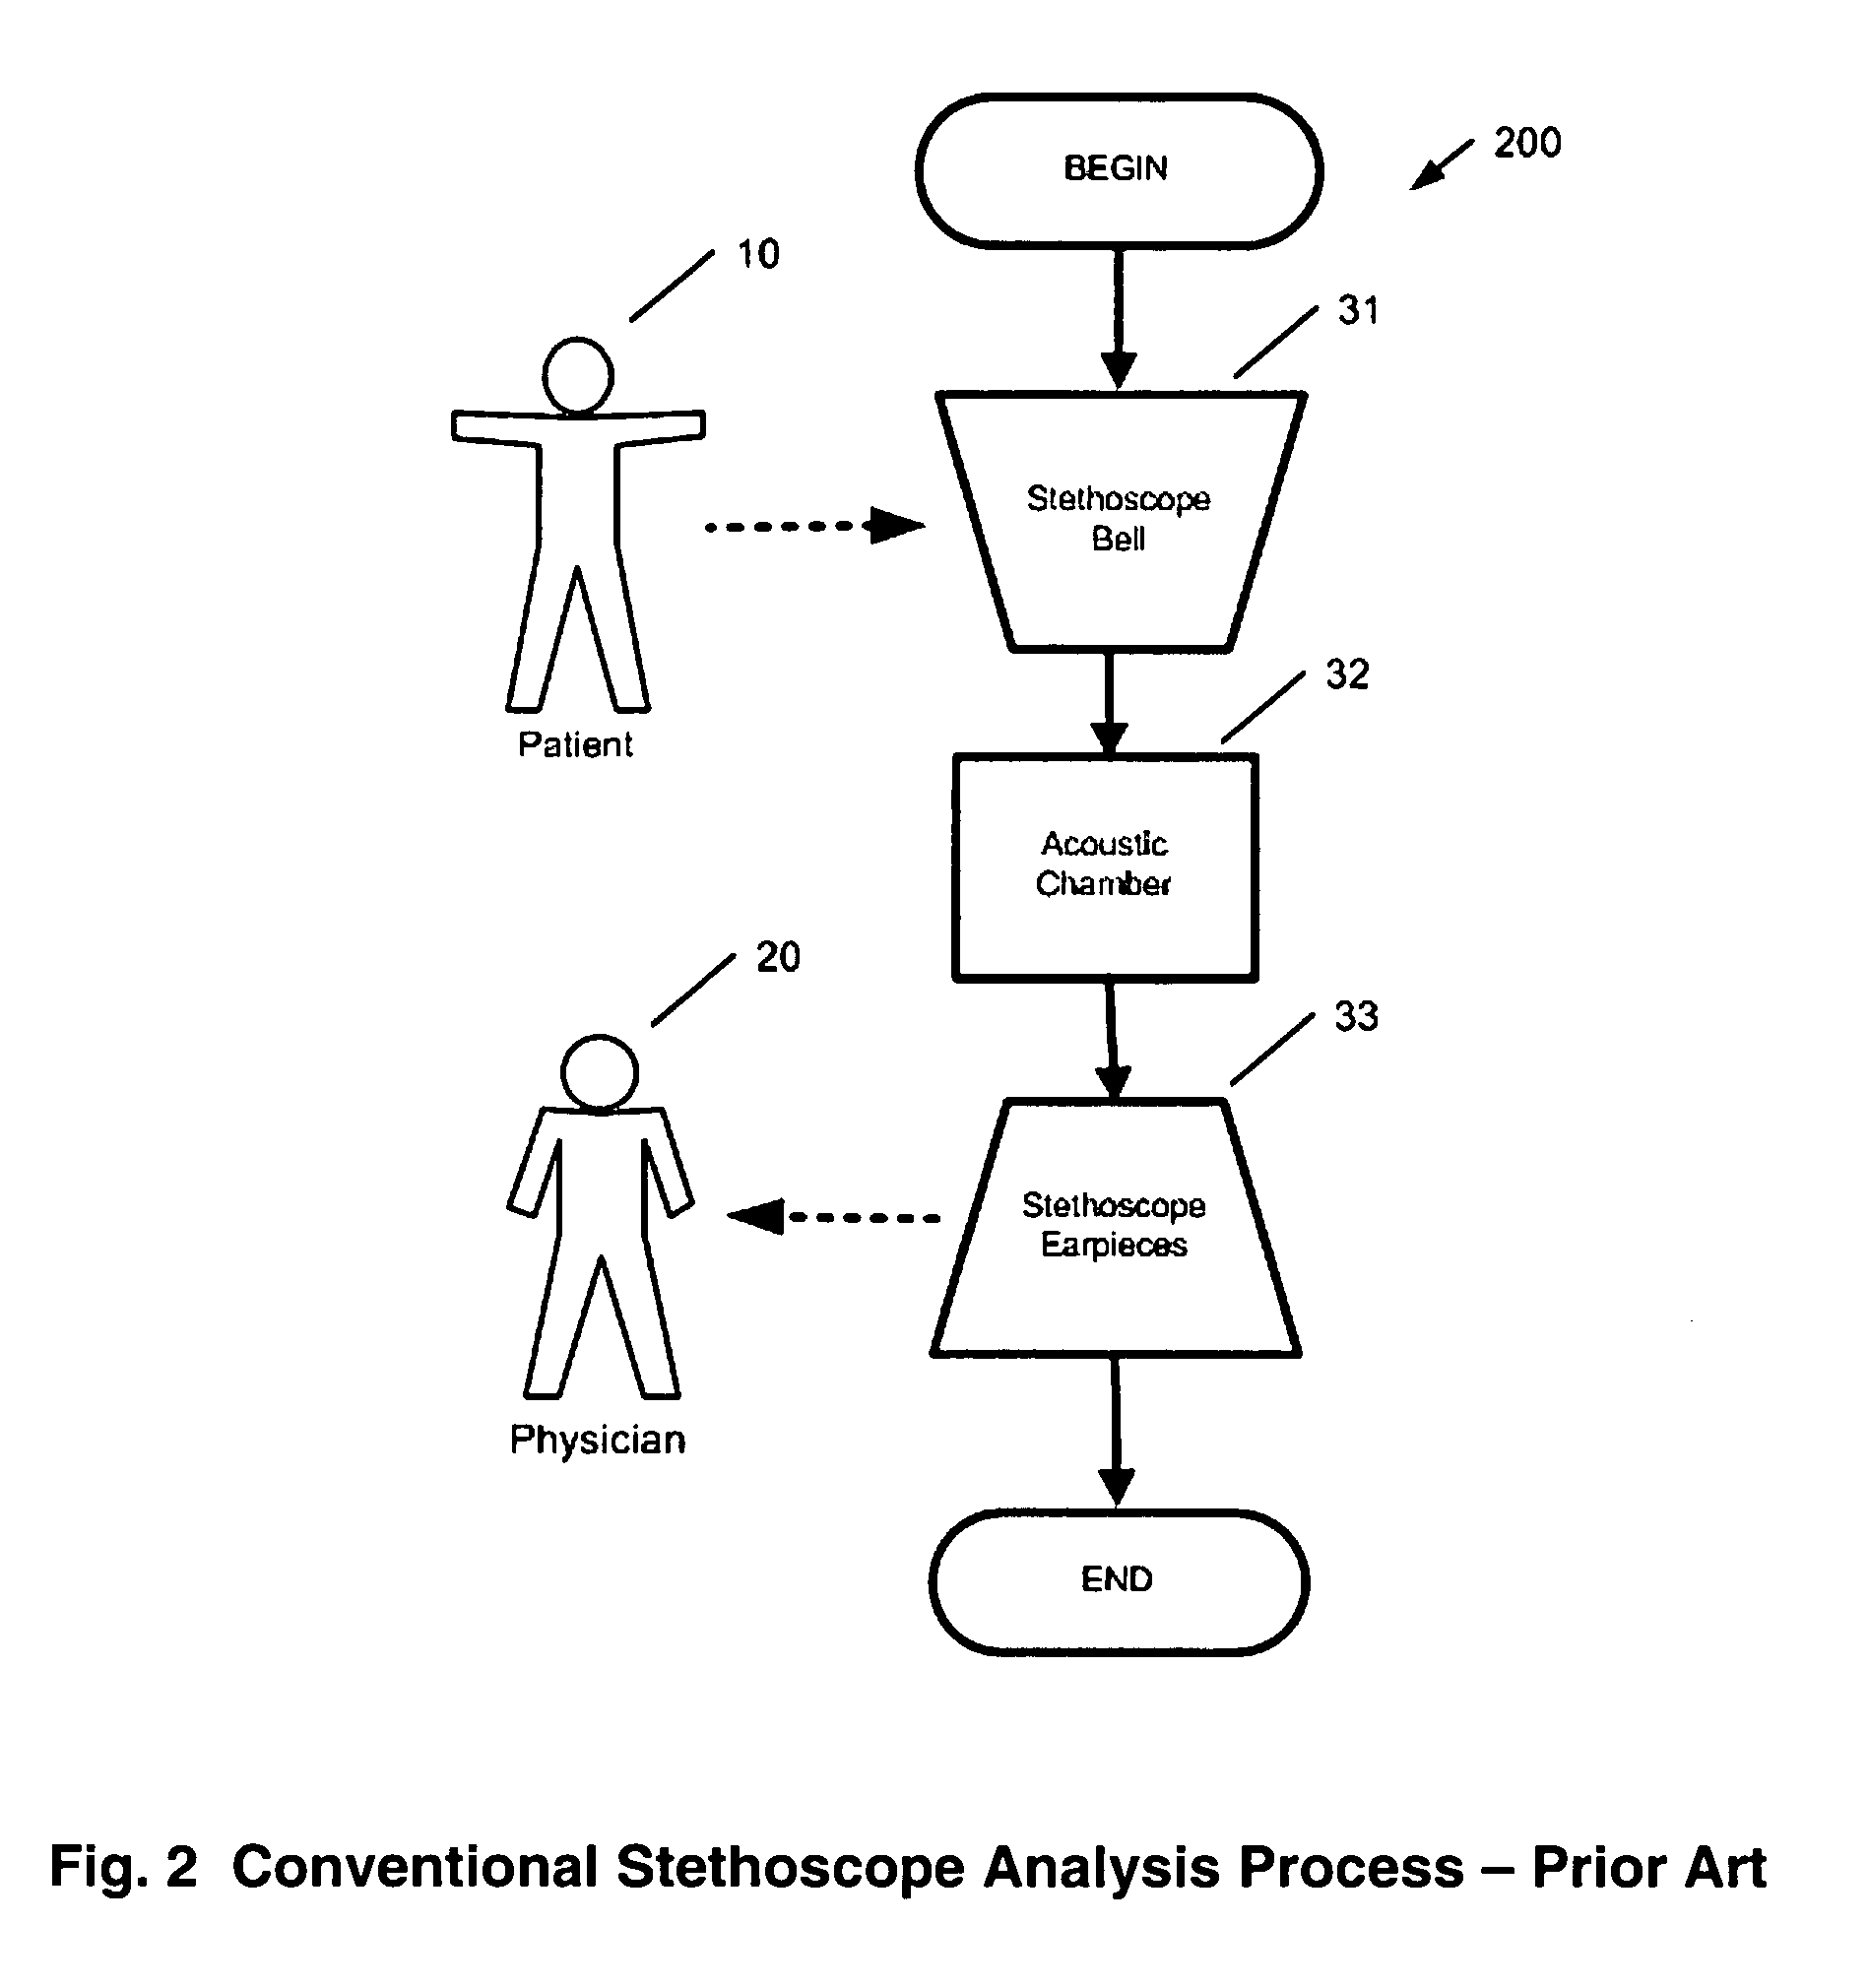 Method and system for continuous monitoring and diagnosis of body sounds